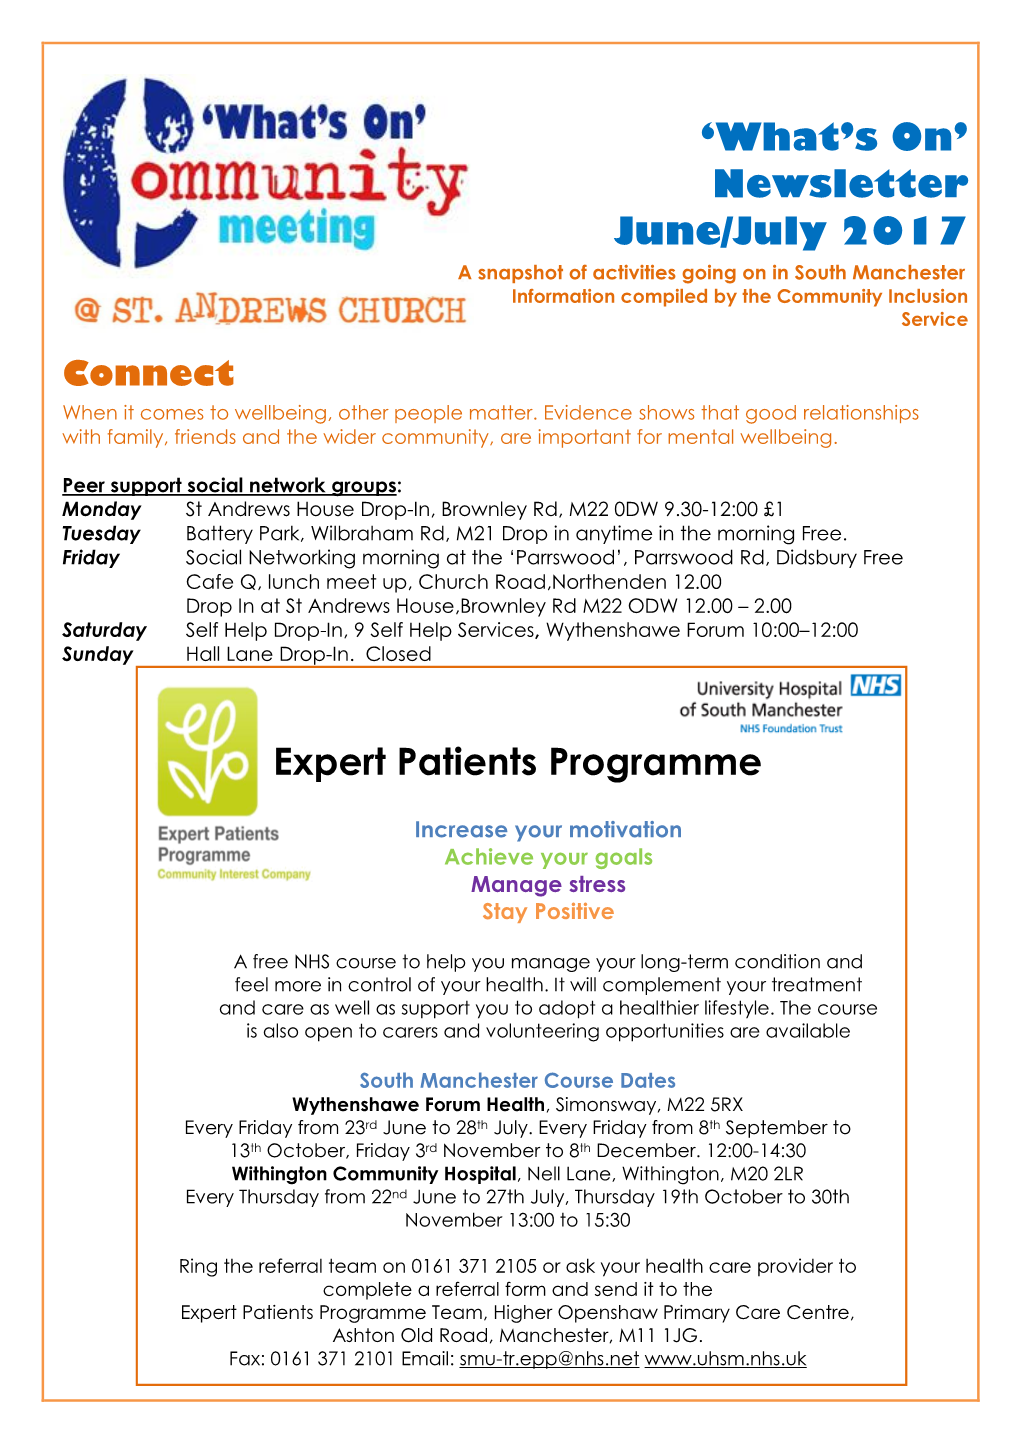 'What's On' Newsletter June/July 2017 Expert Patients Programme